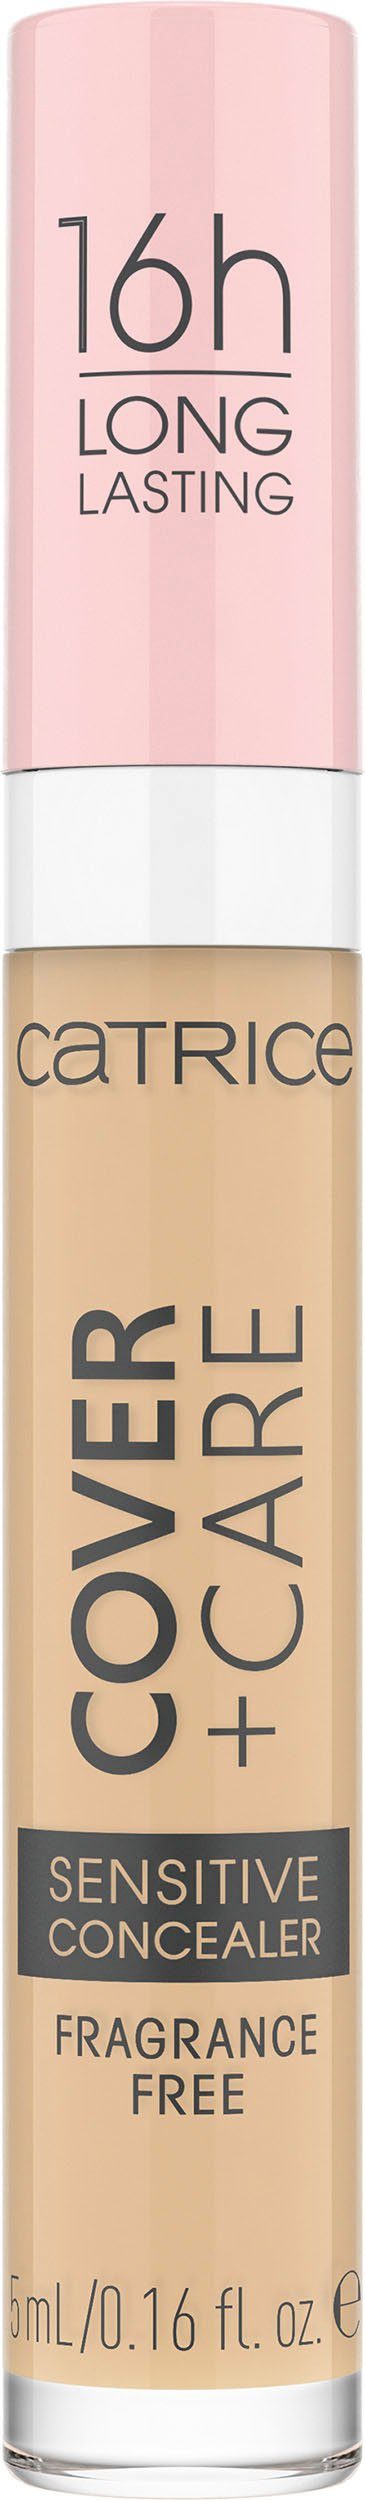 Sensitive 008W Care + nude Concealer, 3-tlg. Cover Catrice Catrice Concealer